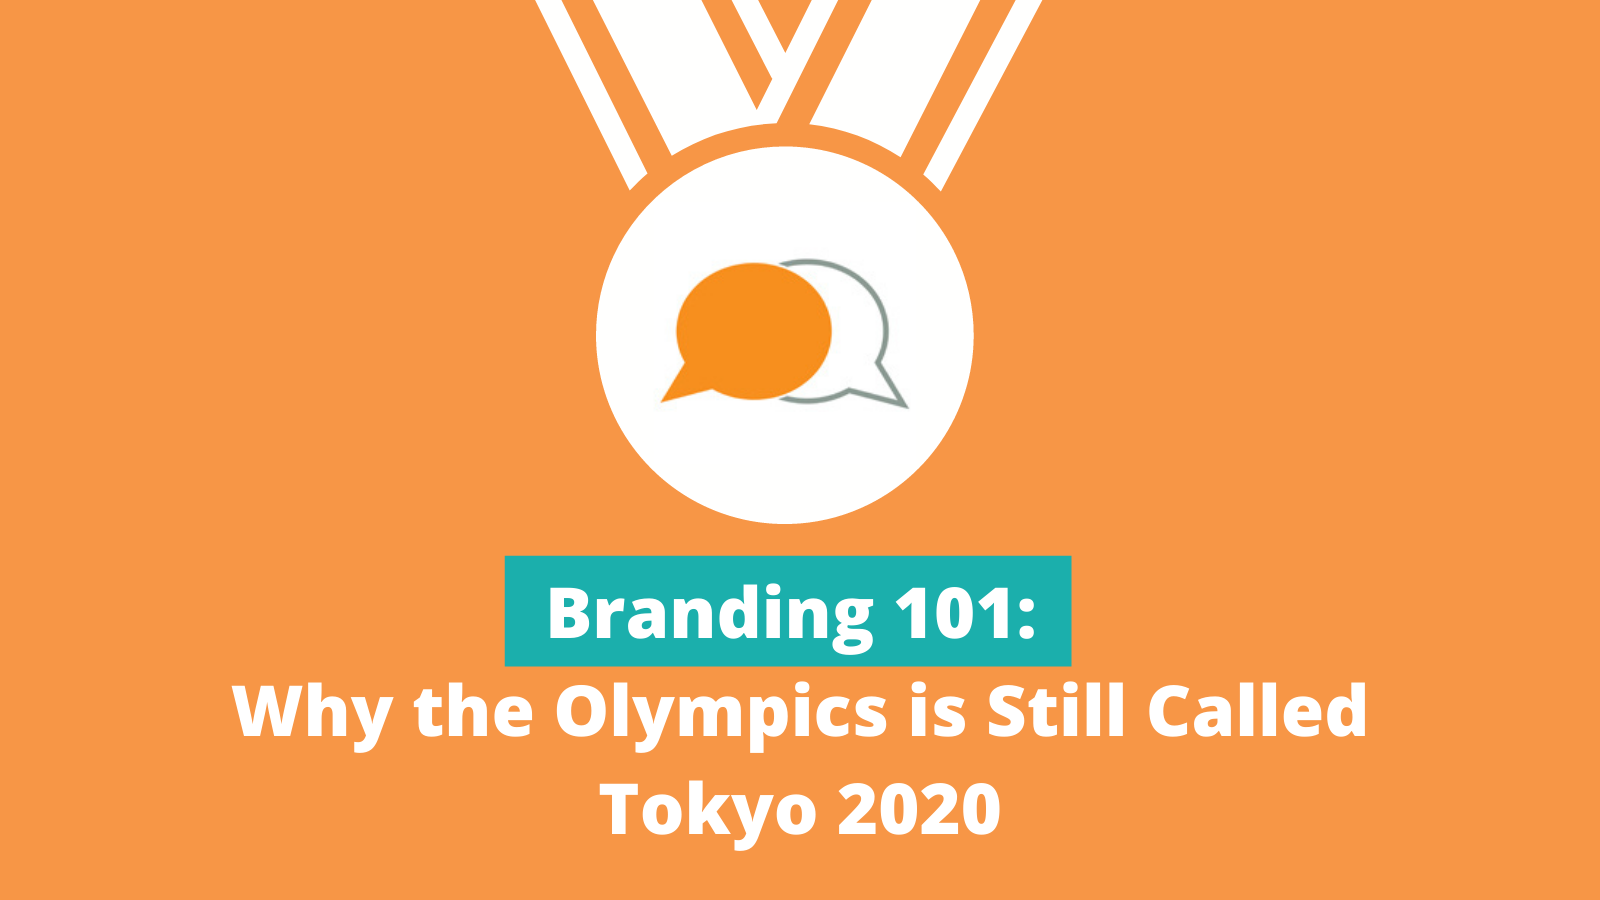 Branding 101 - Part 2: Why the Olympics is Still Called Tokyo 2020